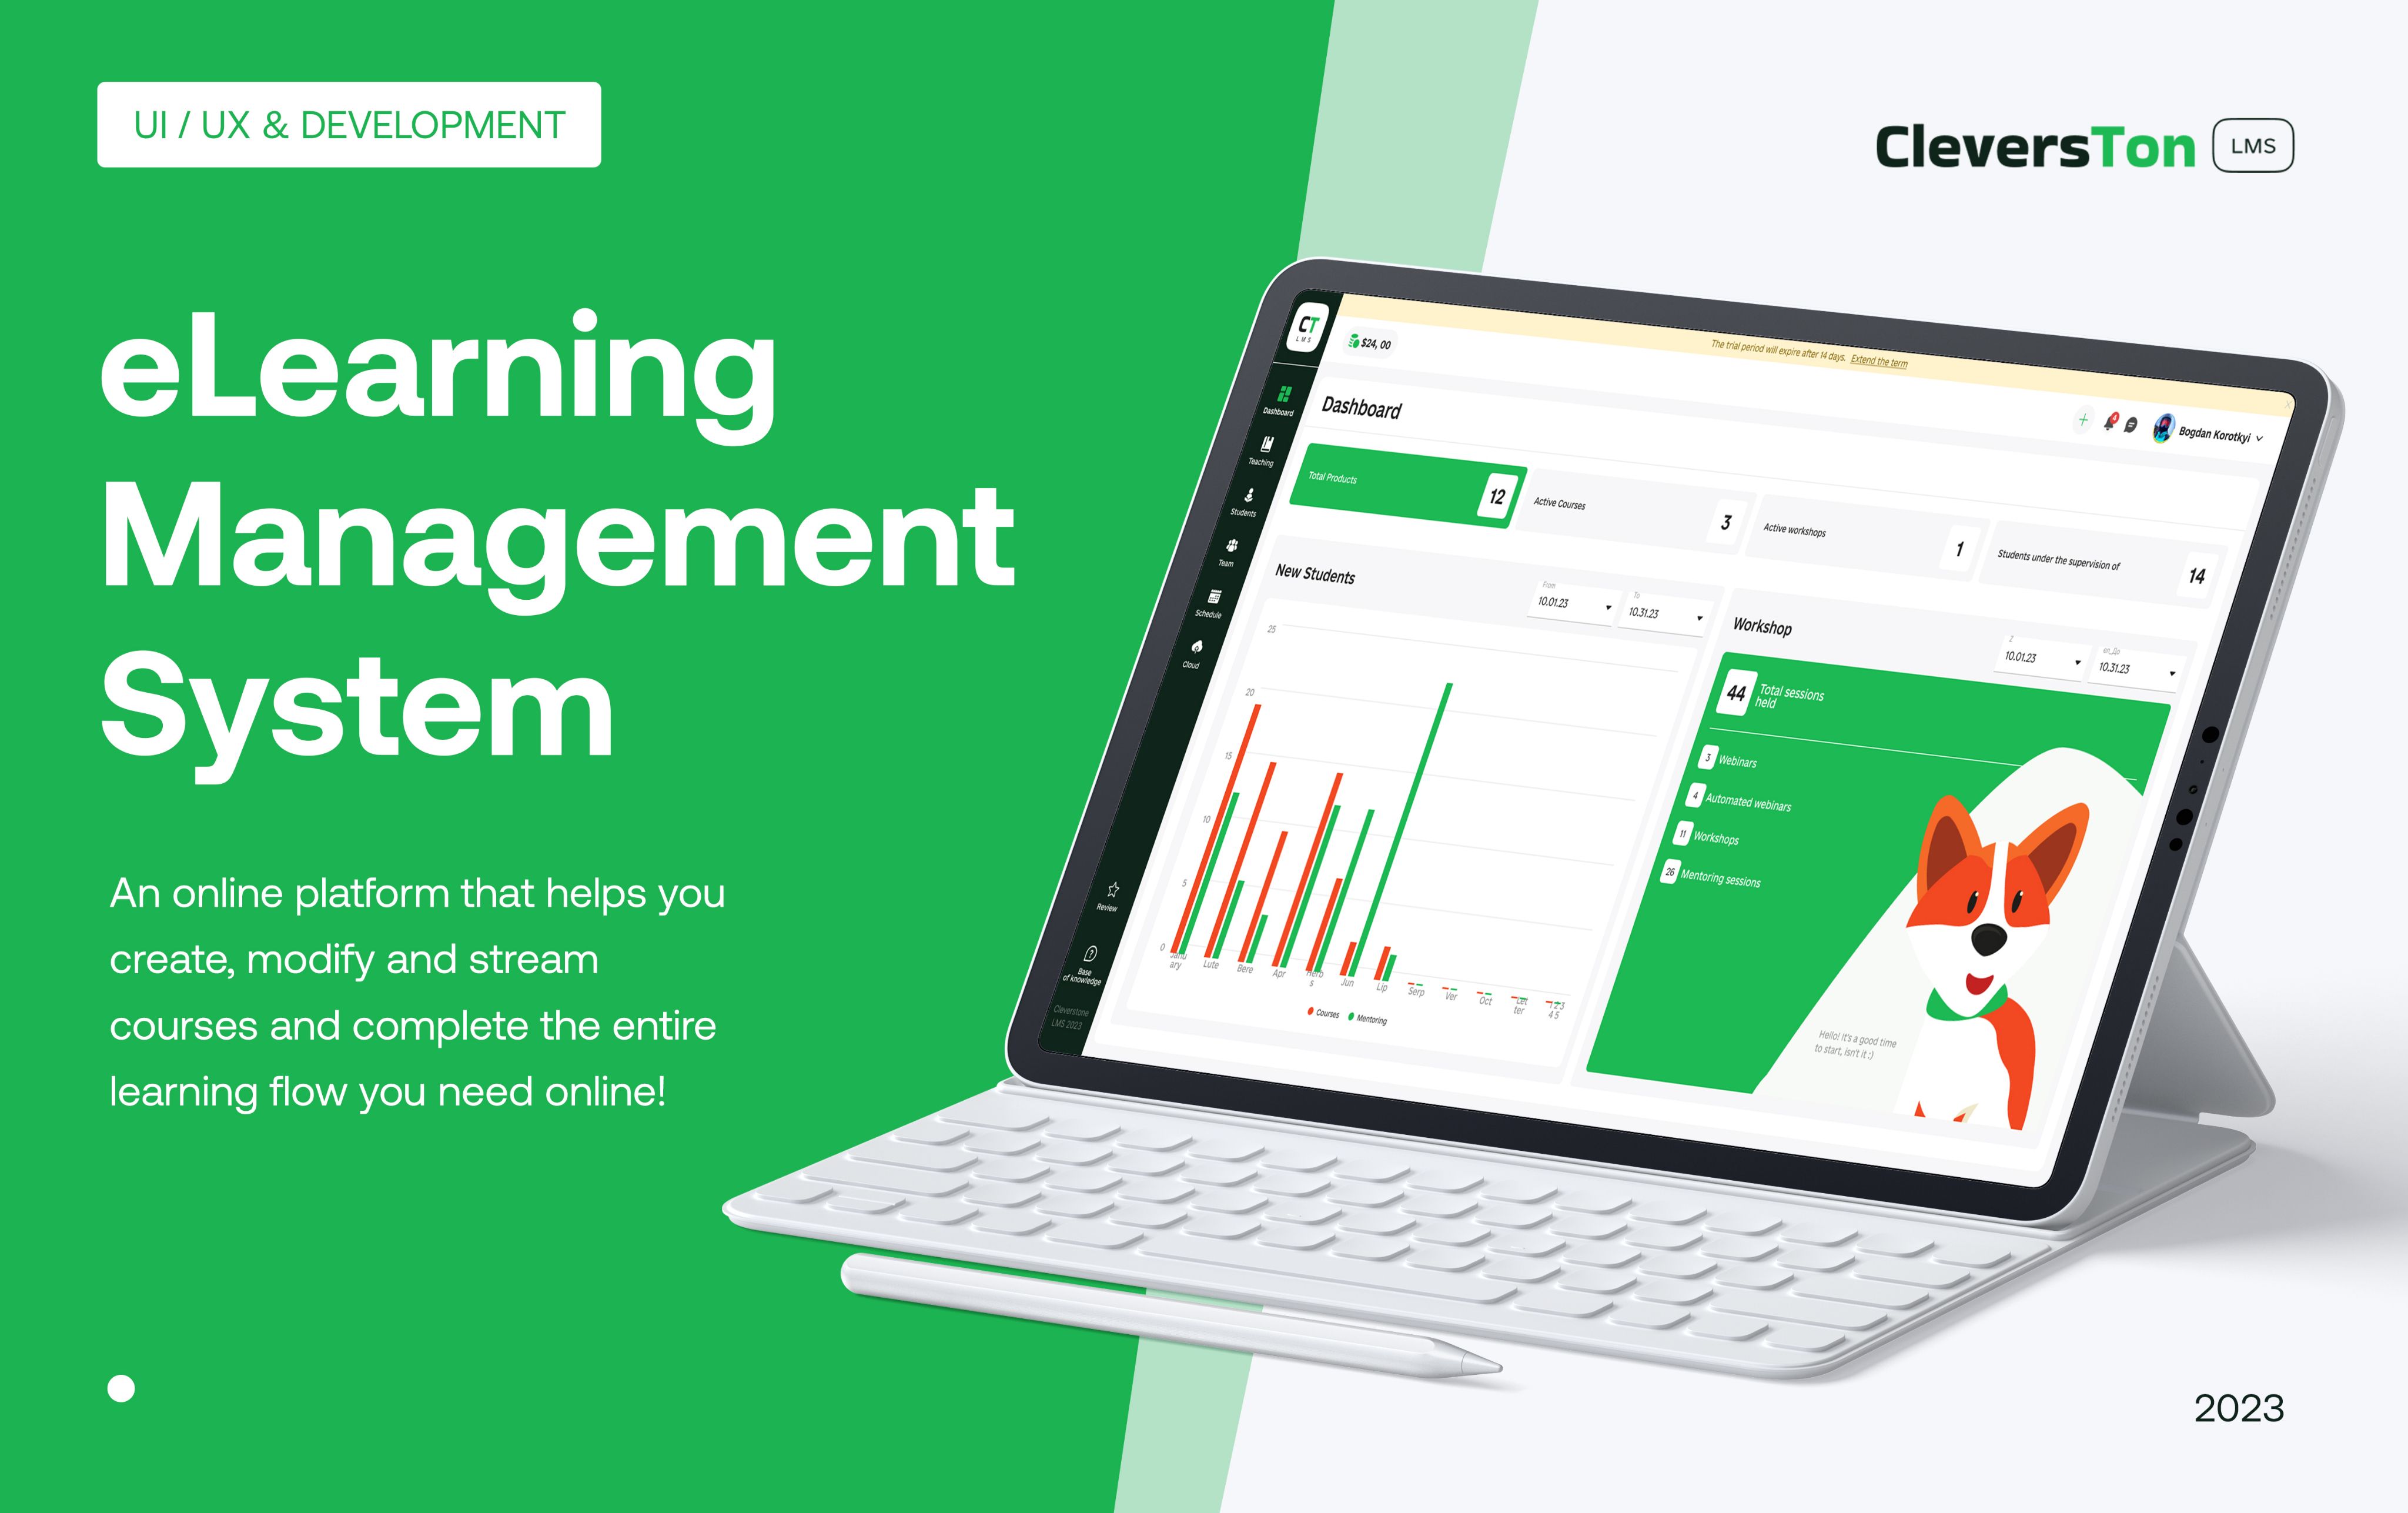 eLearning Management System